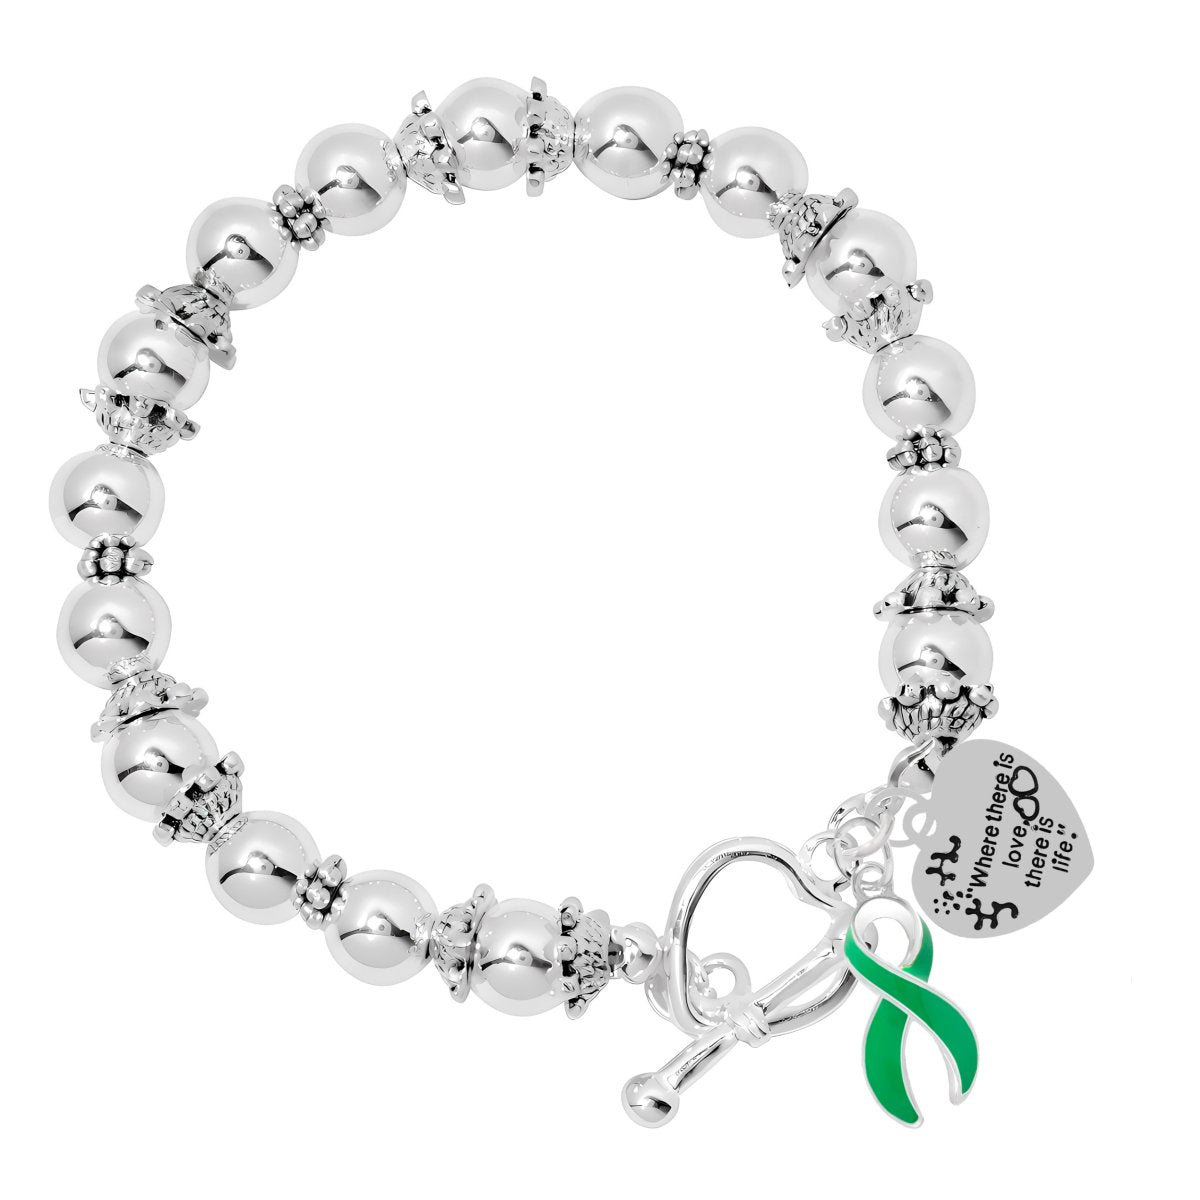 Cerebral Palsy Awareness Charm Bracelets - Fundraising For A Cause